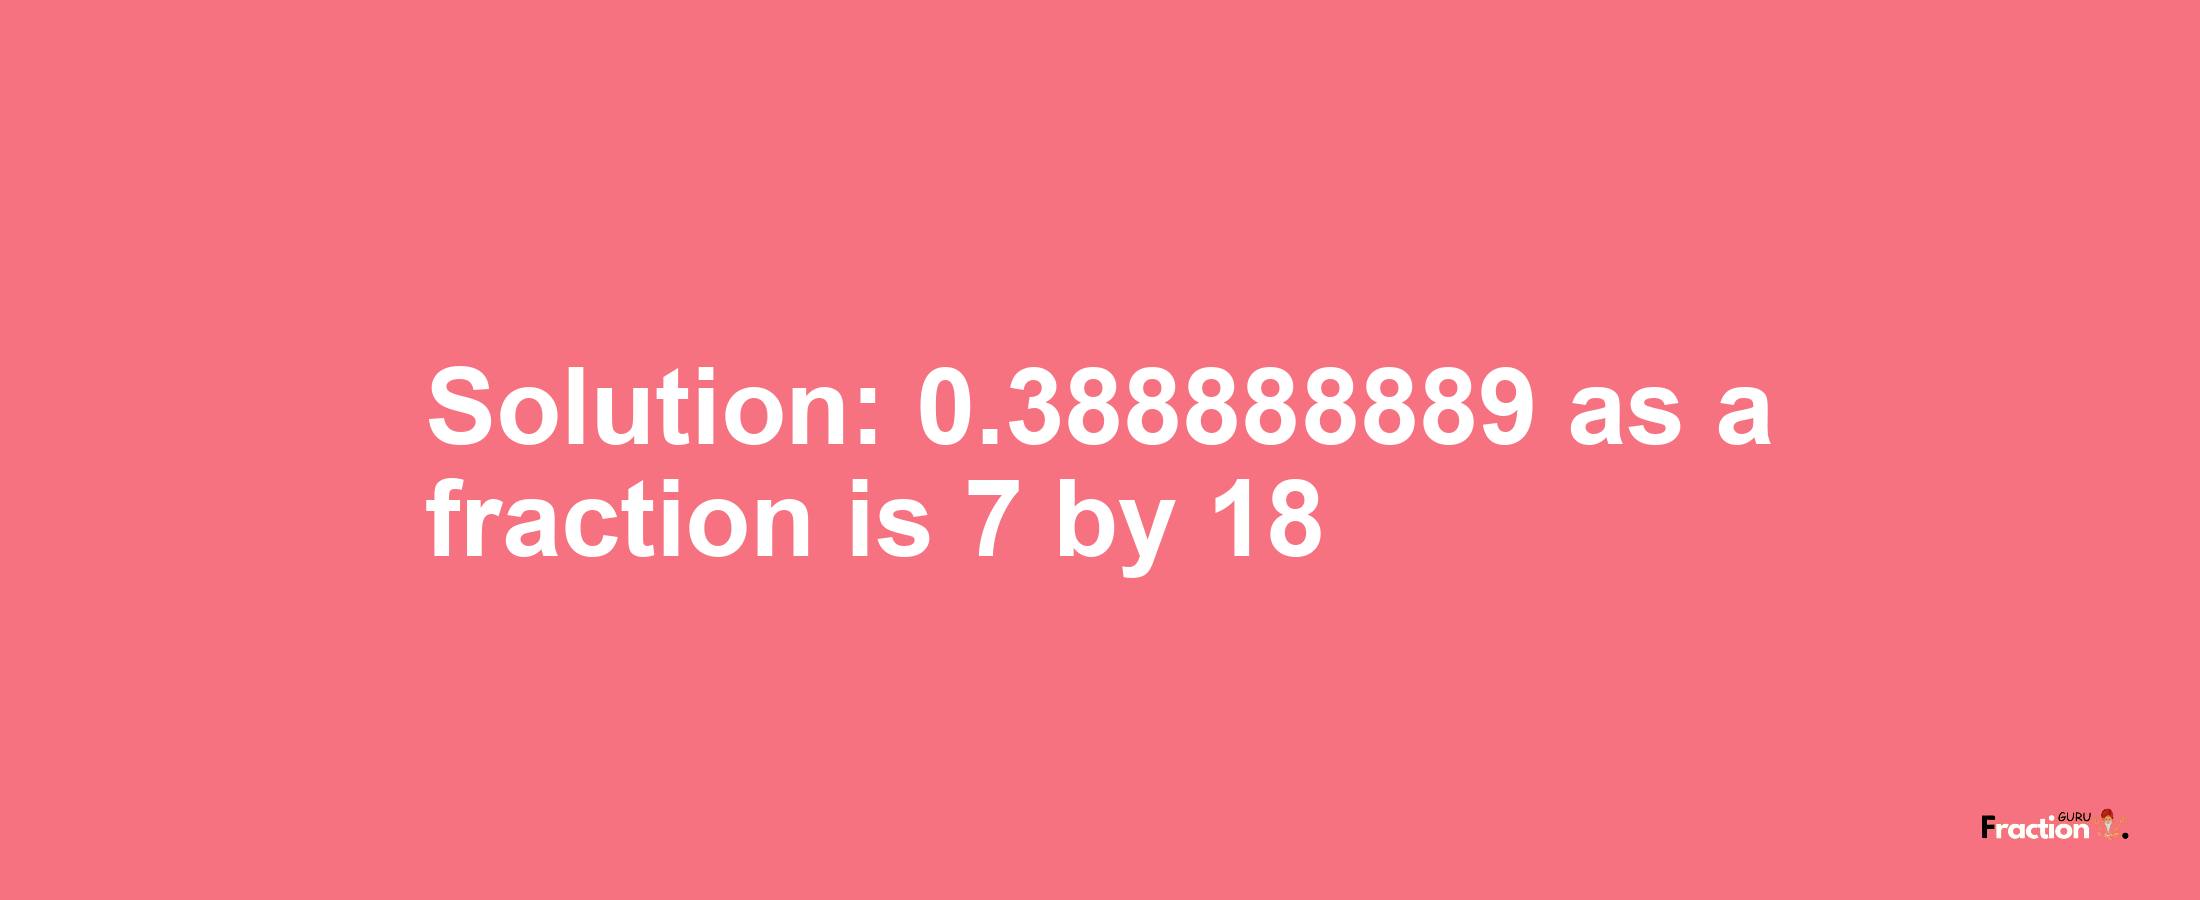 Solution:0.388888889 as a fraction is 7/18